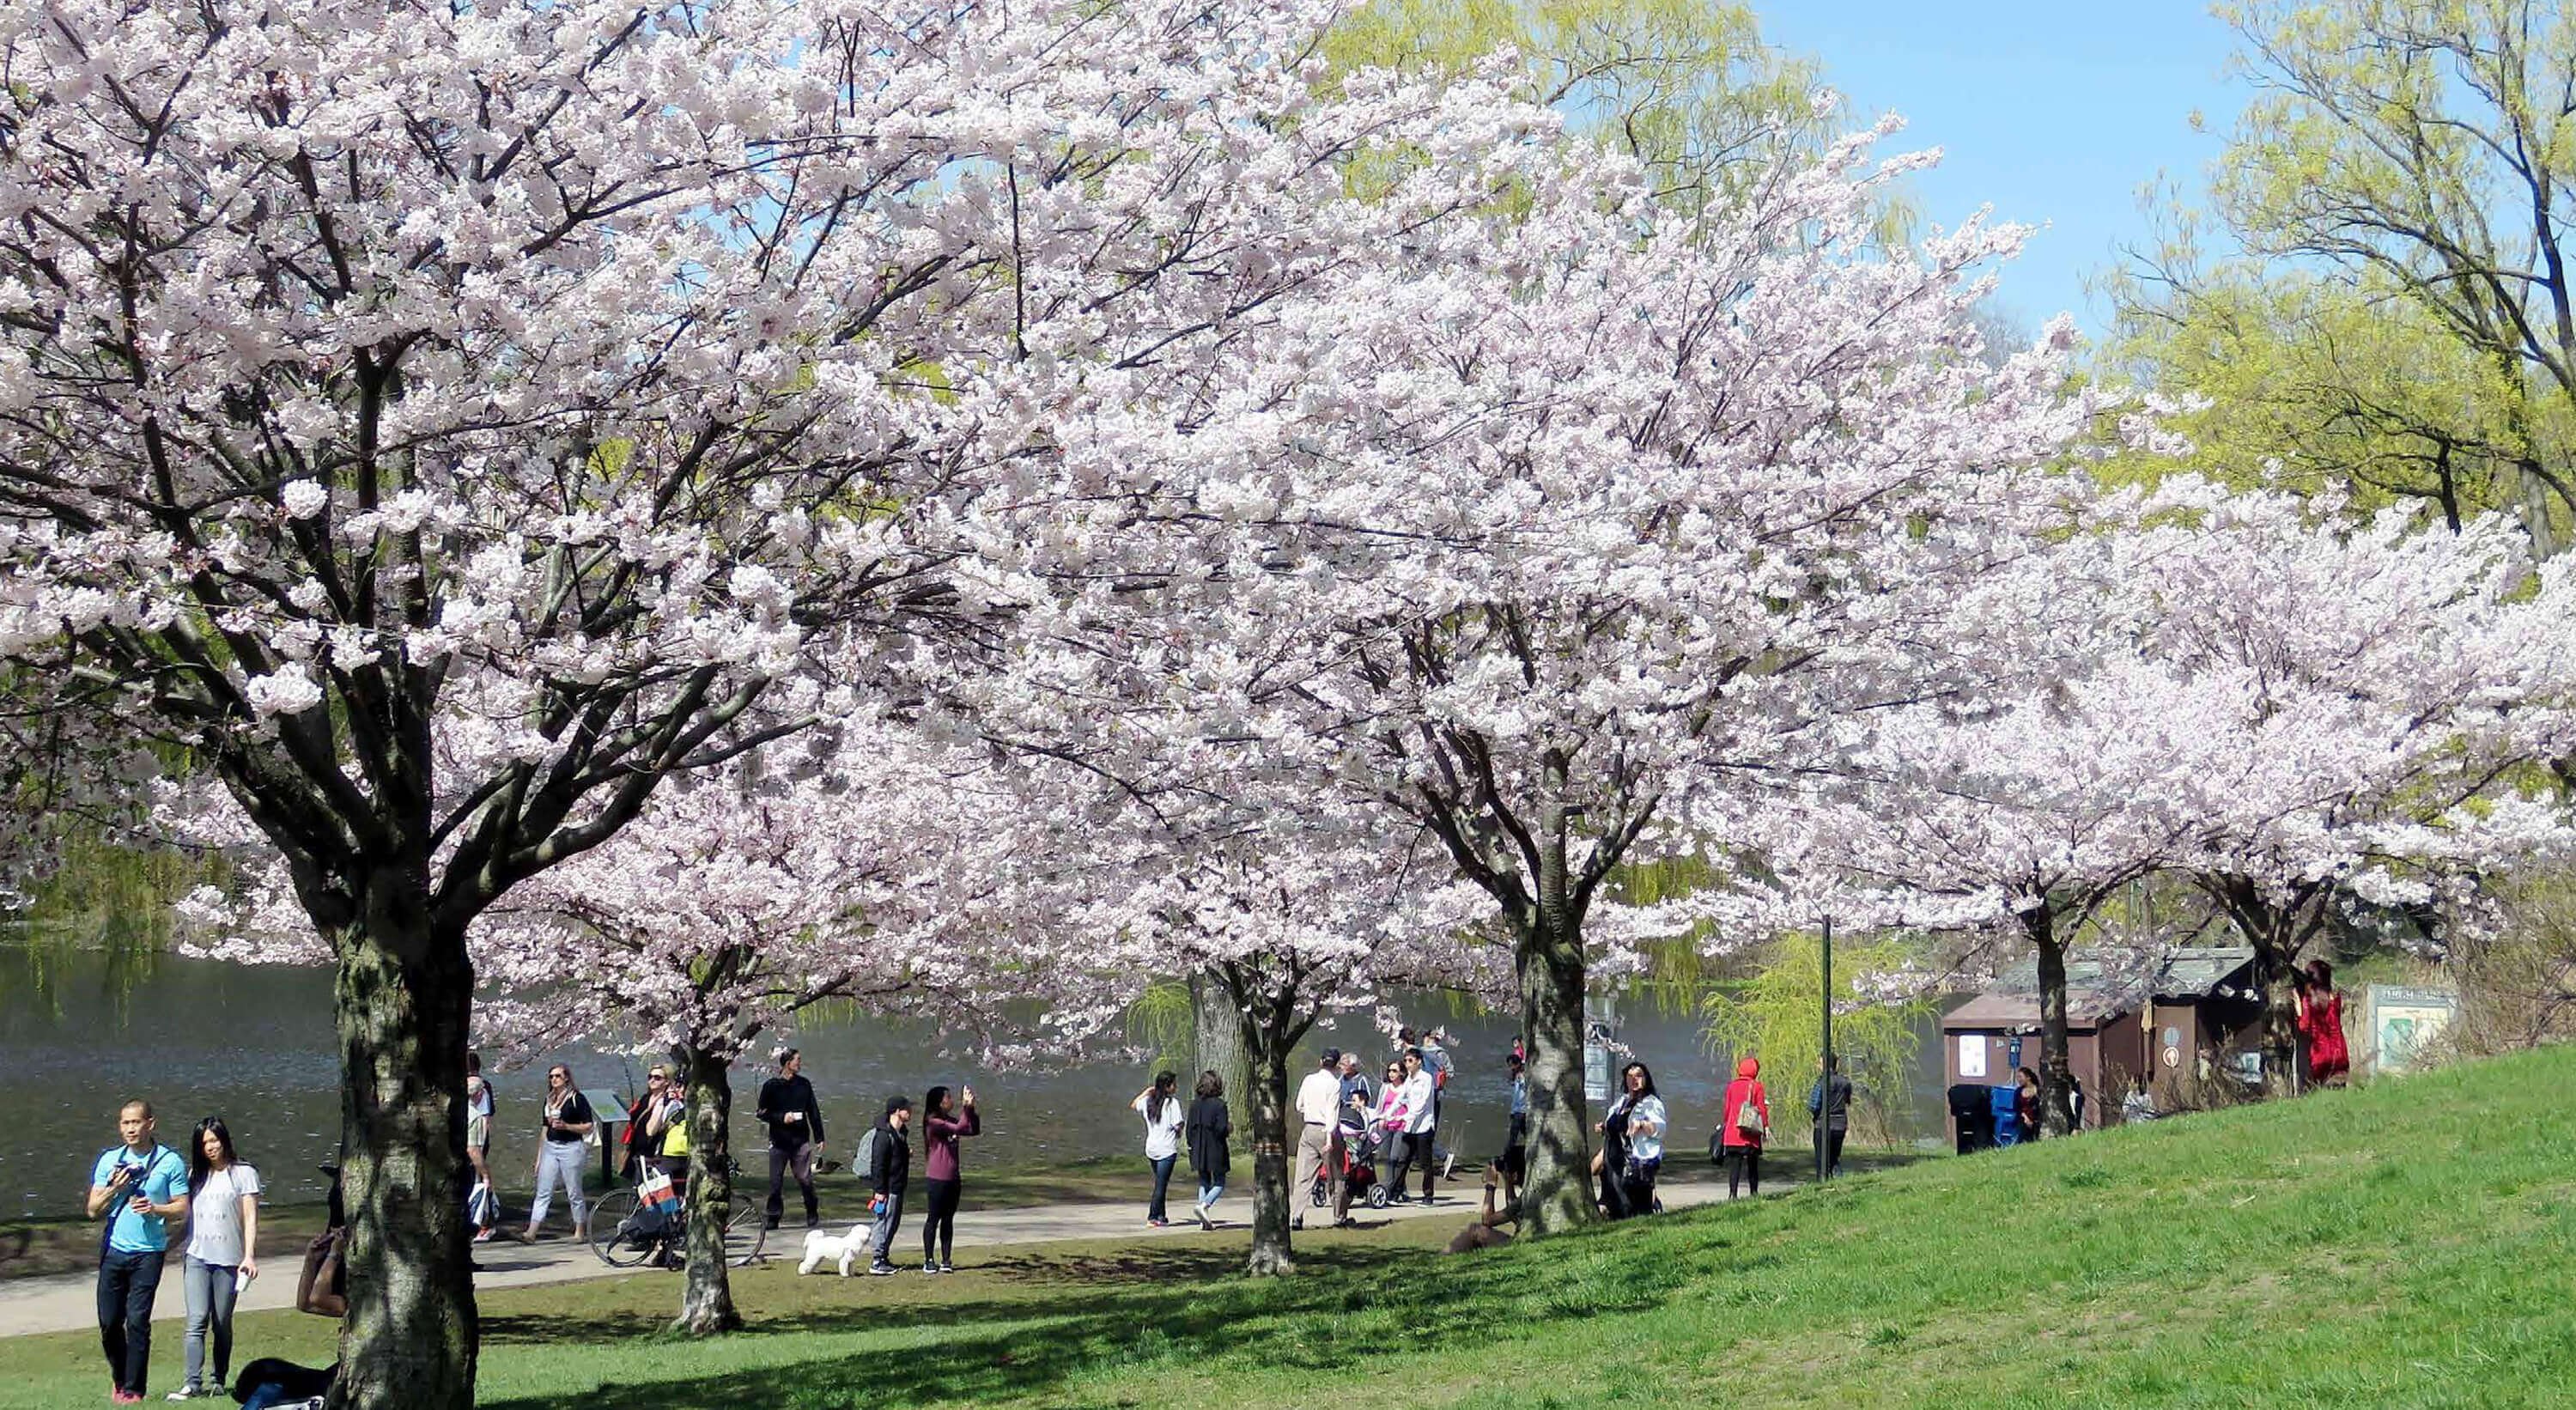 Cherry blossoms in full bloom at Grenadier Park, High Park Toronto. Enthusiasts and locals enjoying the outdoors.